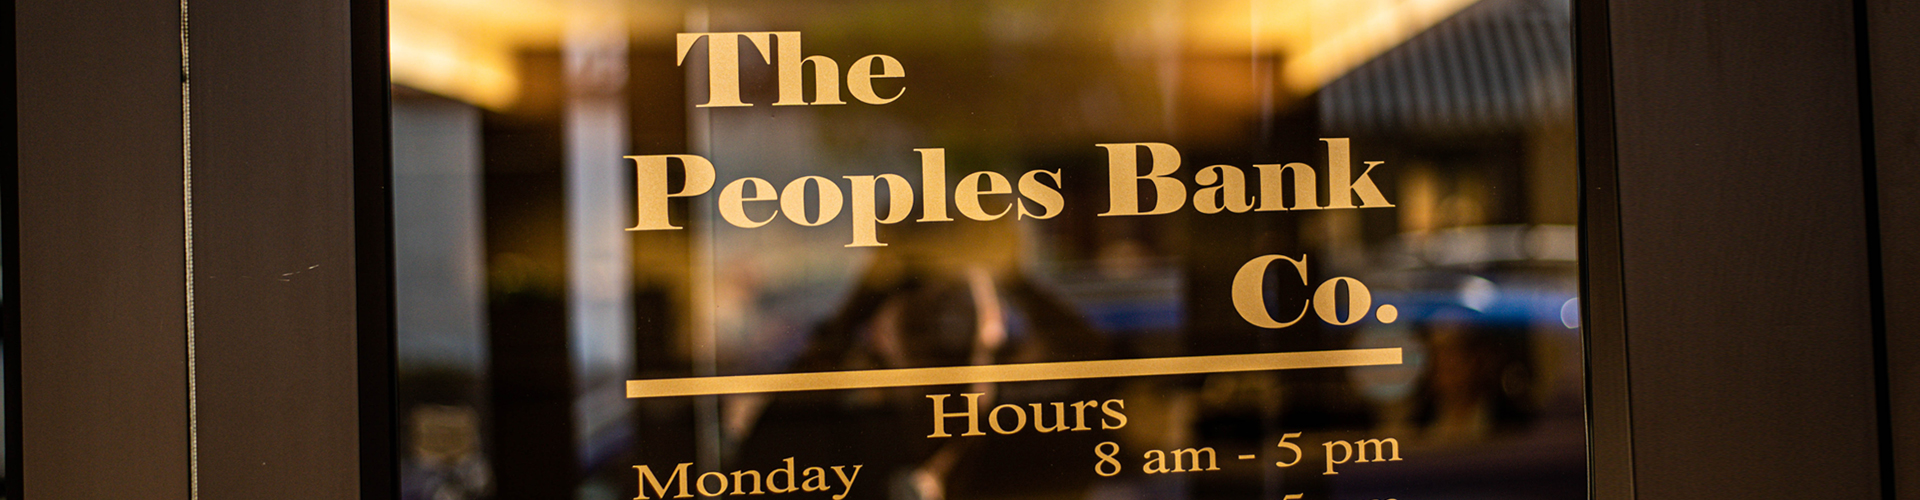 The Peoples Bank Co.